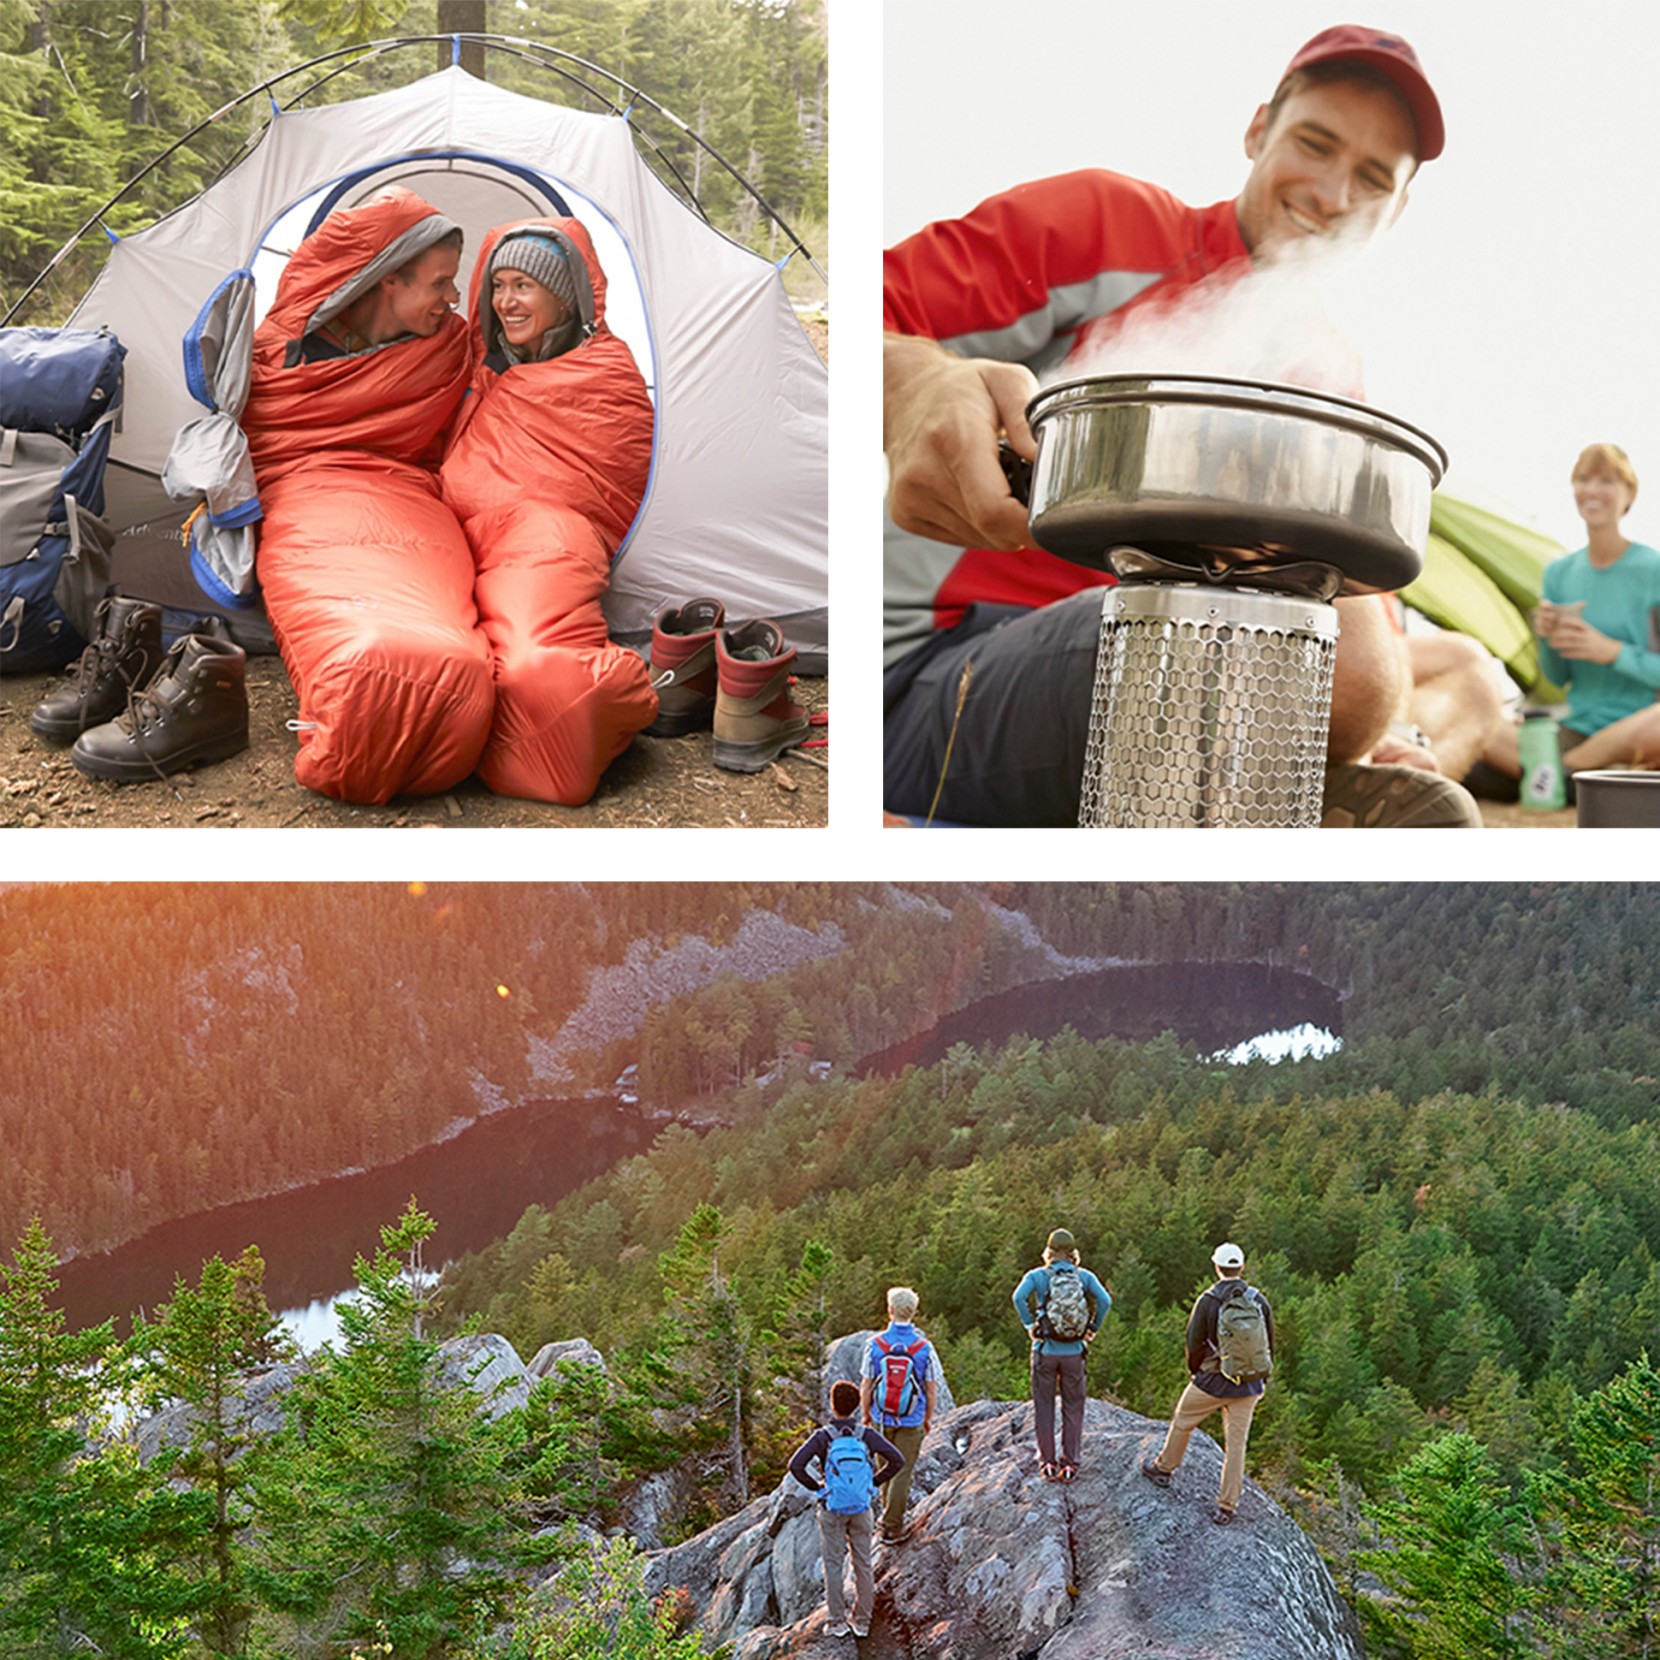 Three pictures of people enjoying camping in the outdoors